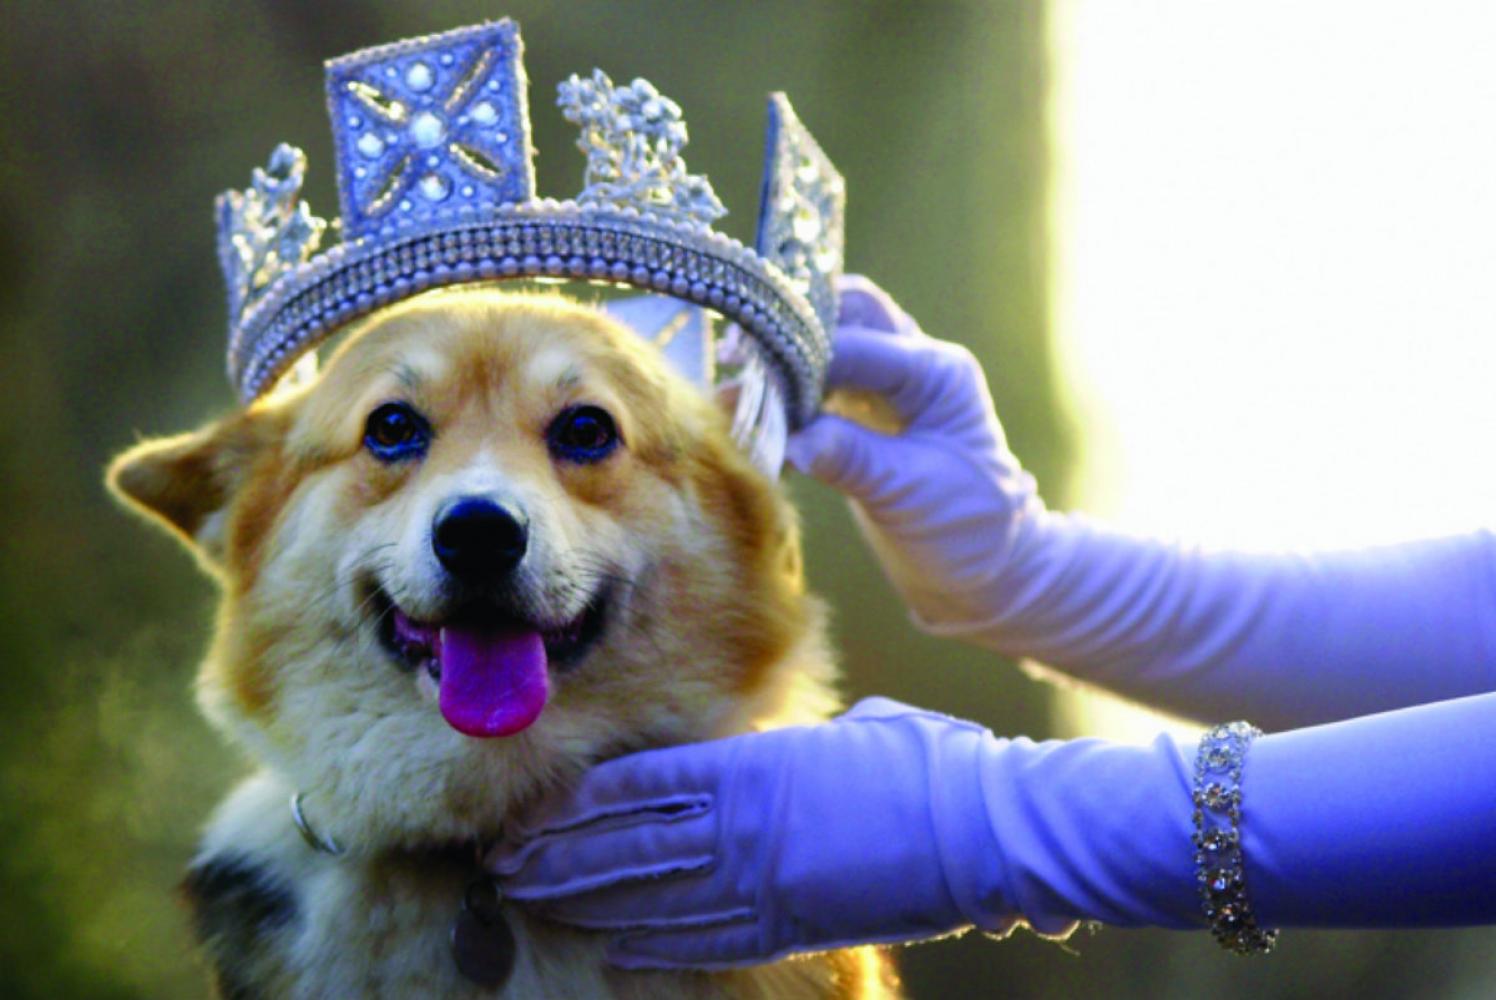 Corgi with tiara being placed by gloved hand